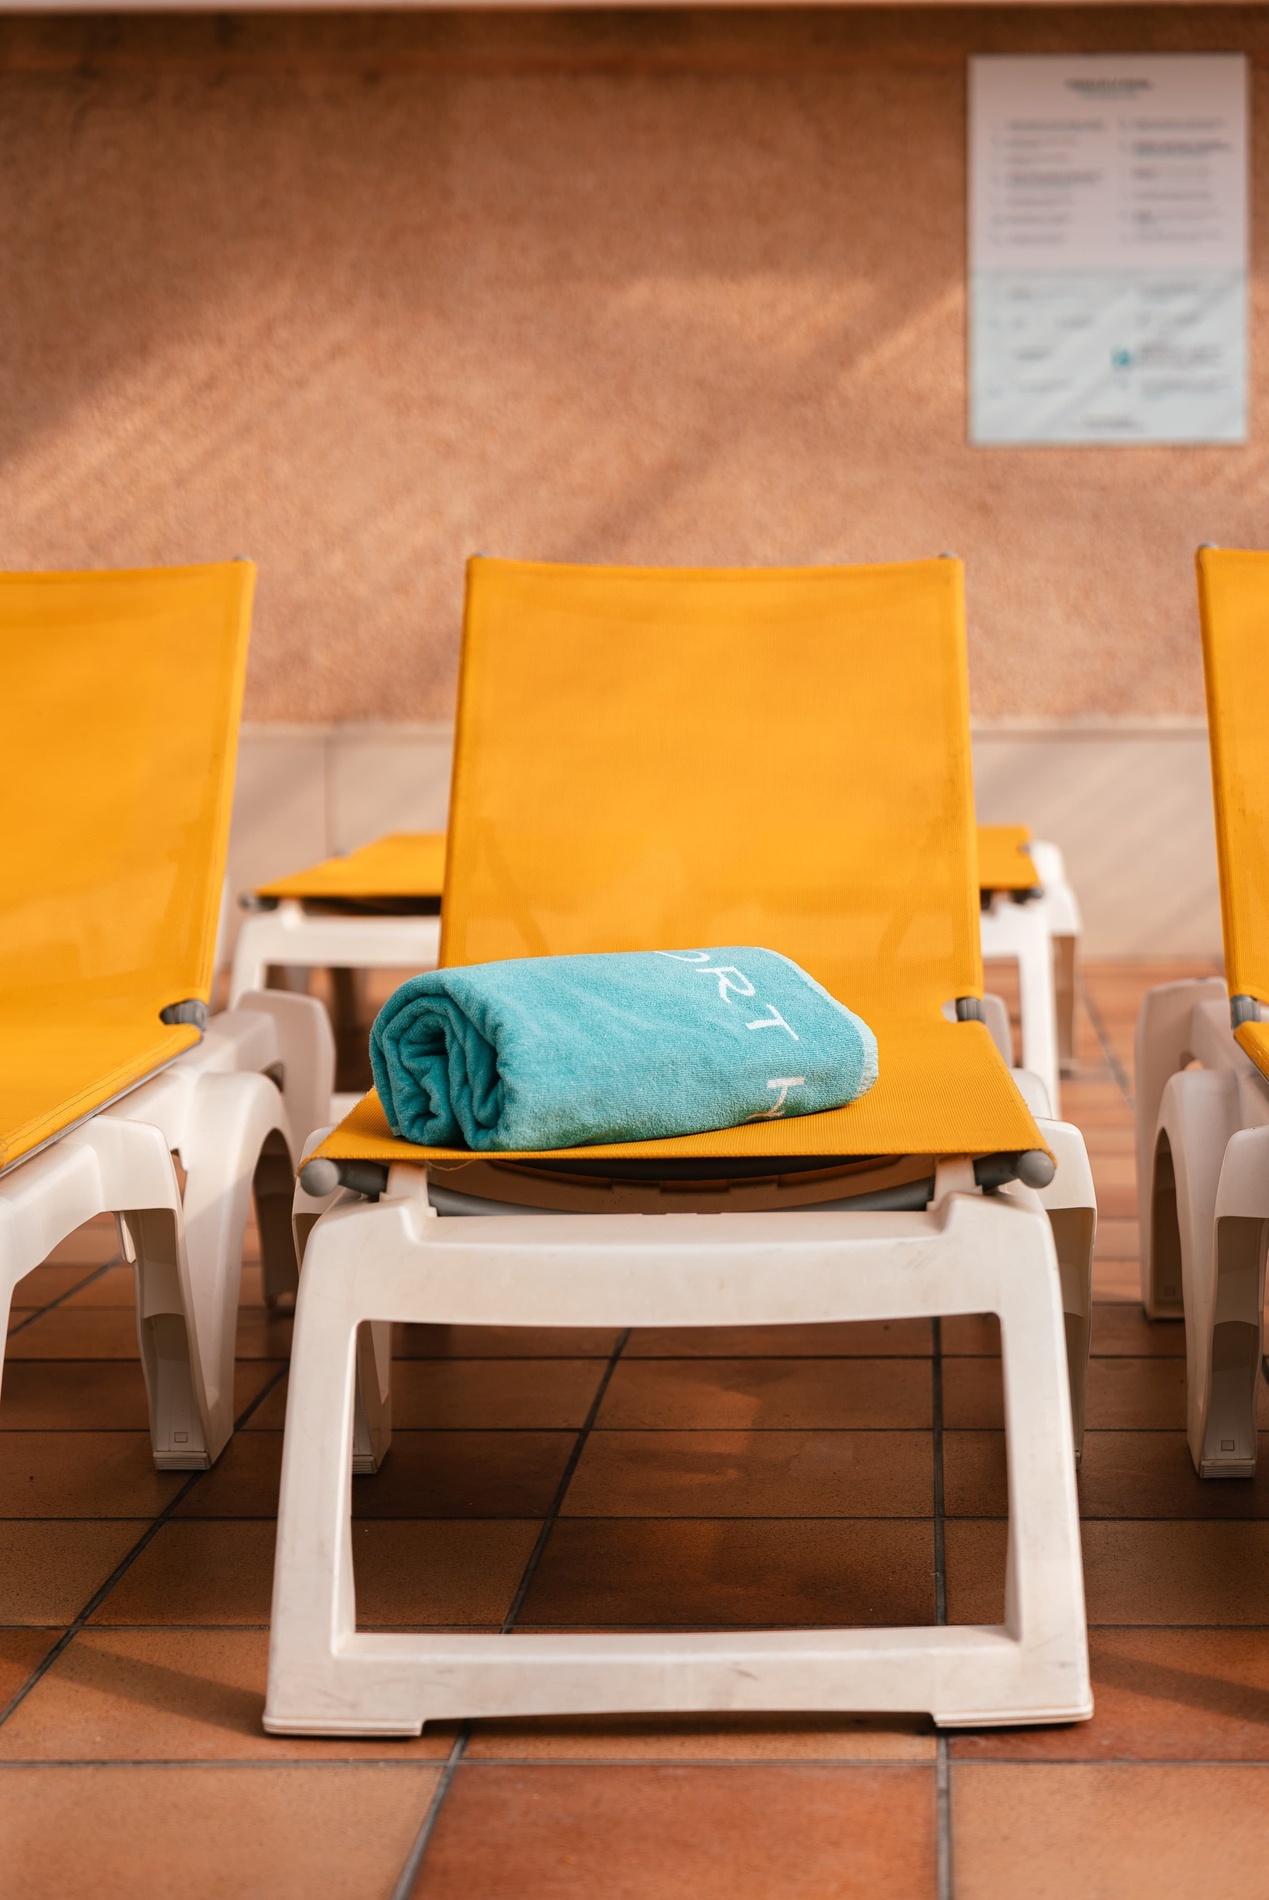 a blue towel on a yellow chair that says rt